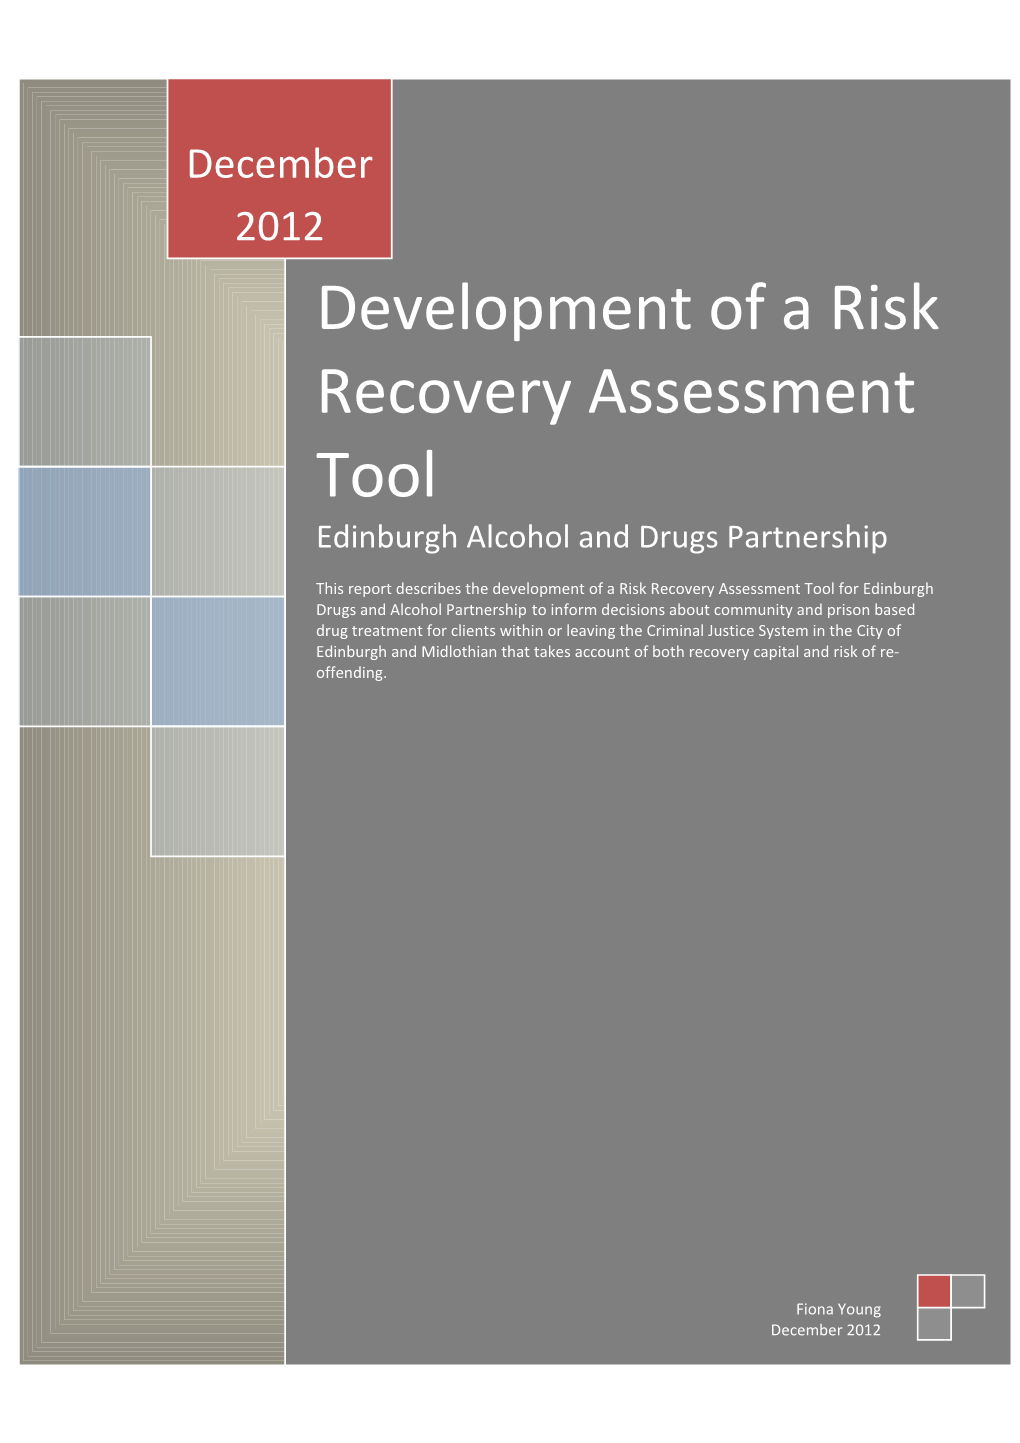 Development of a Risk Recovery Assessment Tool